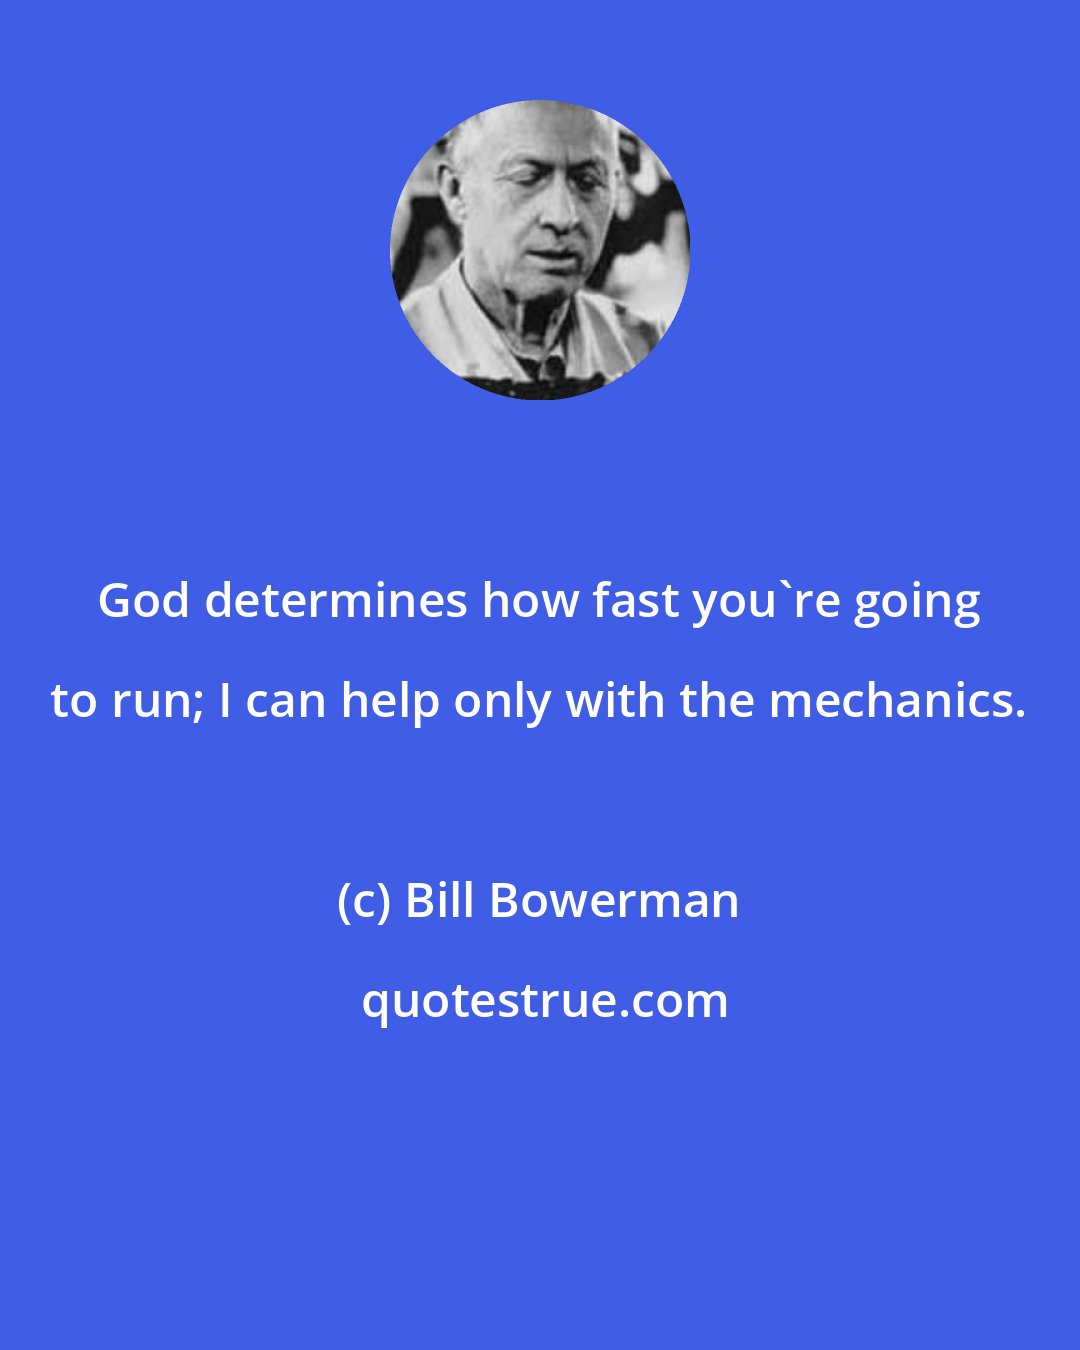 Bill Bowerman: God determines how fast you're going to run; I can help only with the mechanics.